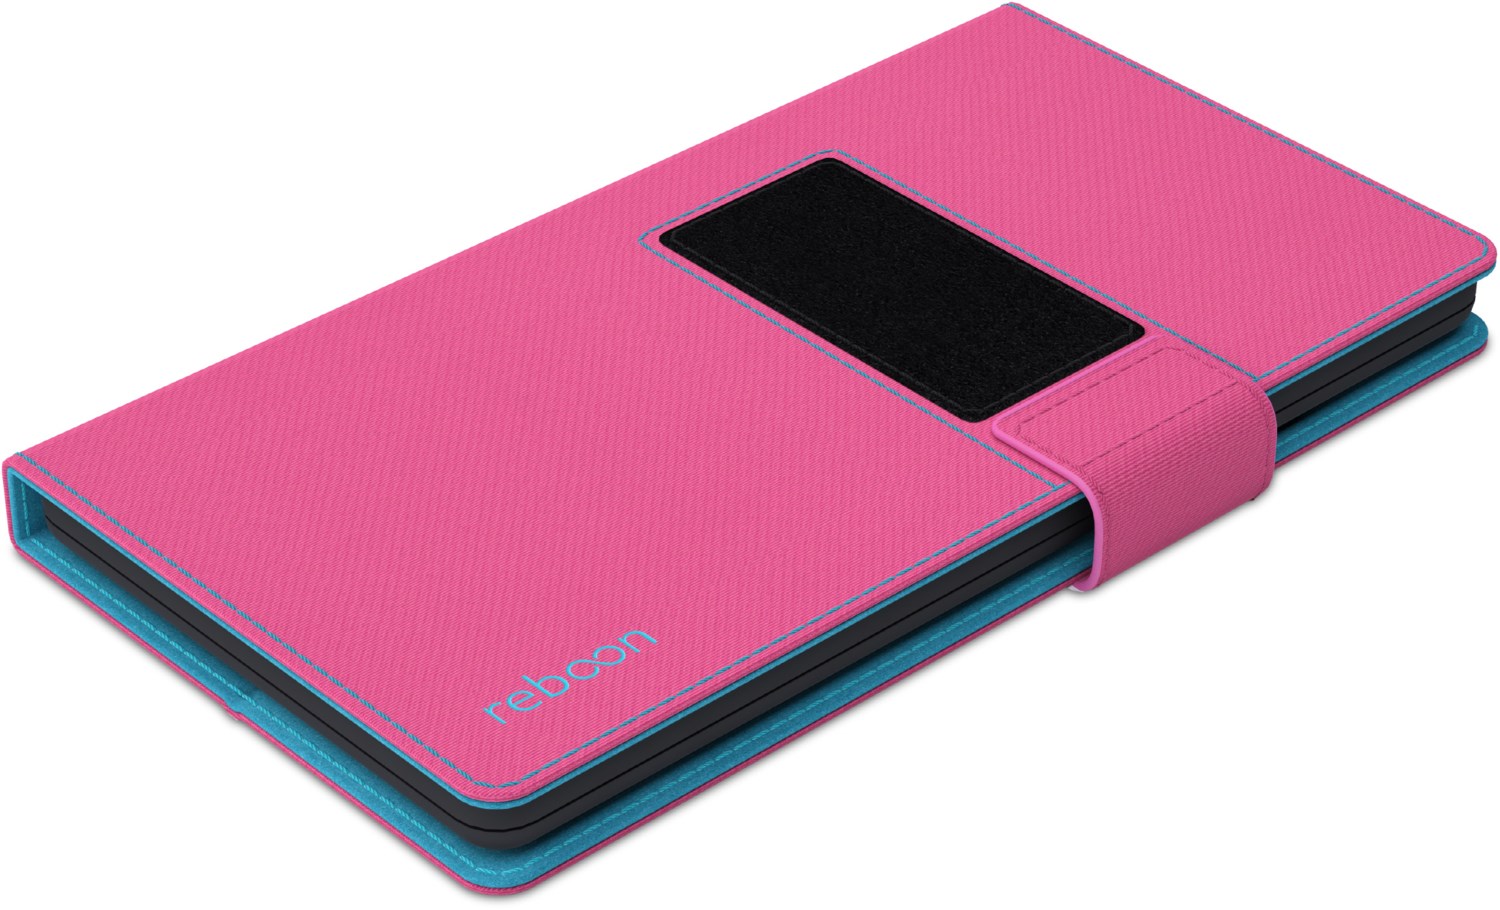 booncover XS Handyhülle pink